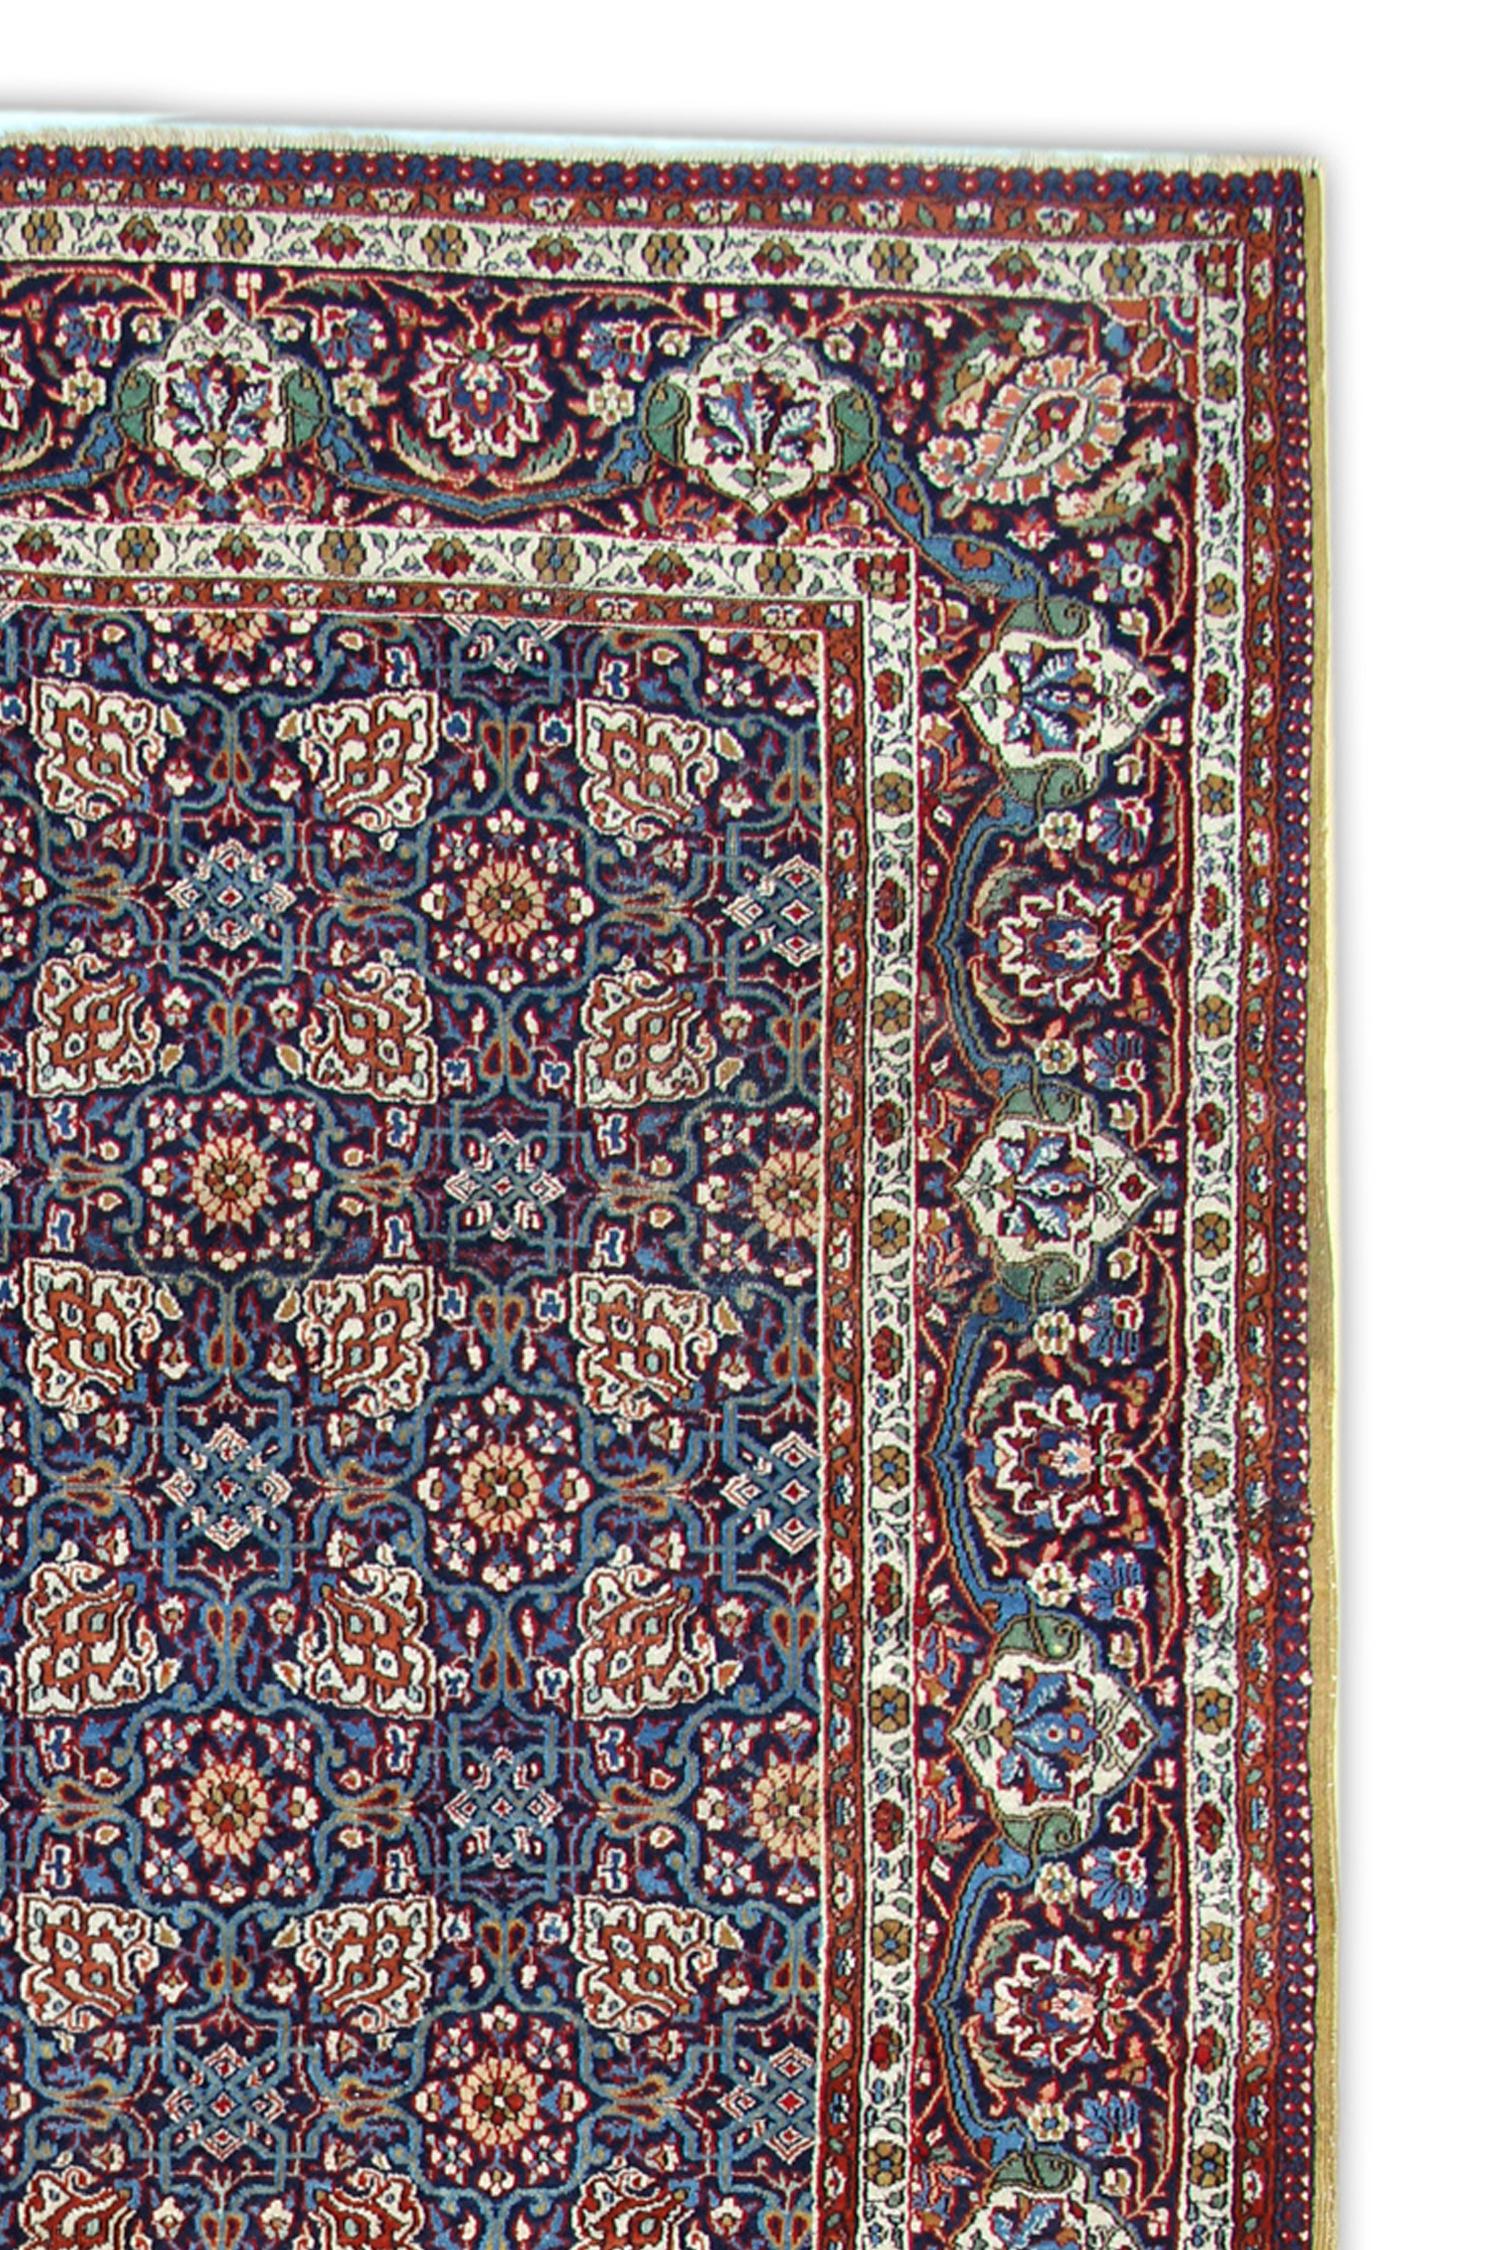 Caucasian Antique Rugs Oriental Wool Blue Rug Geometric Living Room Rugs for Sale 137x207 For Sale